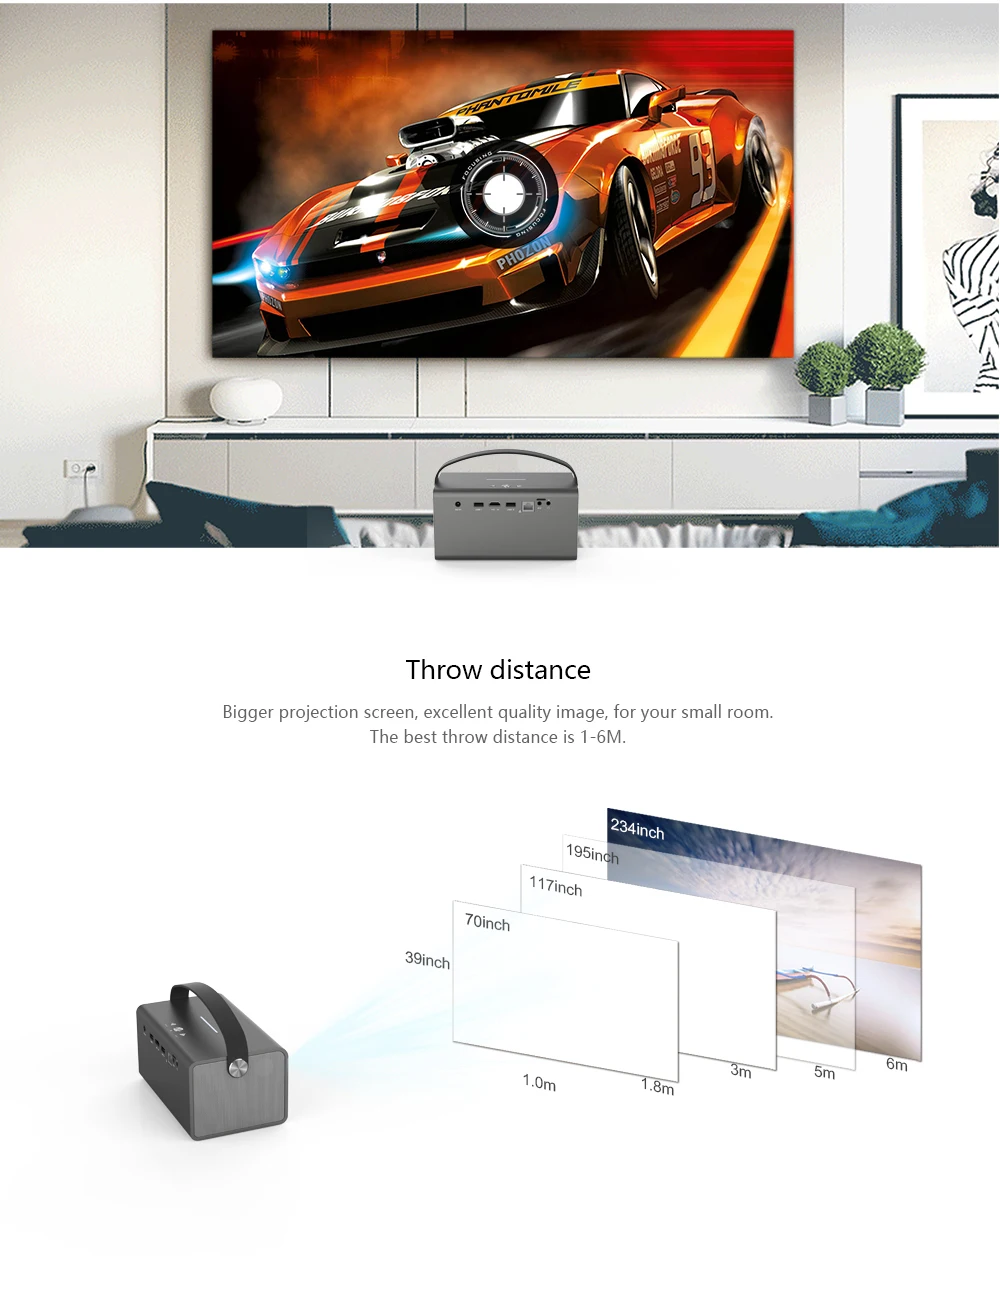 Salange P7 Mini Portable Projector Smart 3D Android 9.0 Wifi BT DLP Home Theater 1080P HD For 4K Cinema Smartphone with Battery